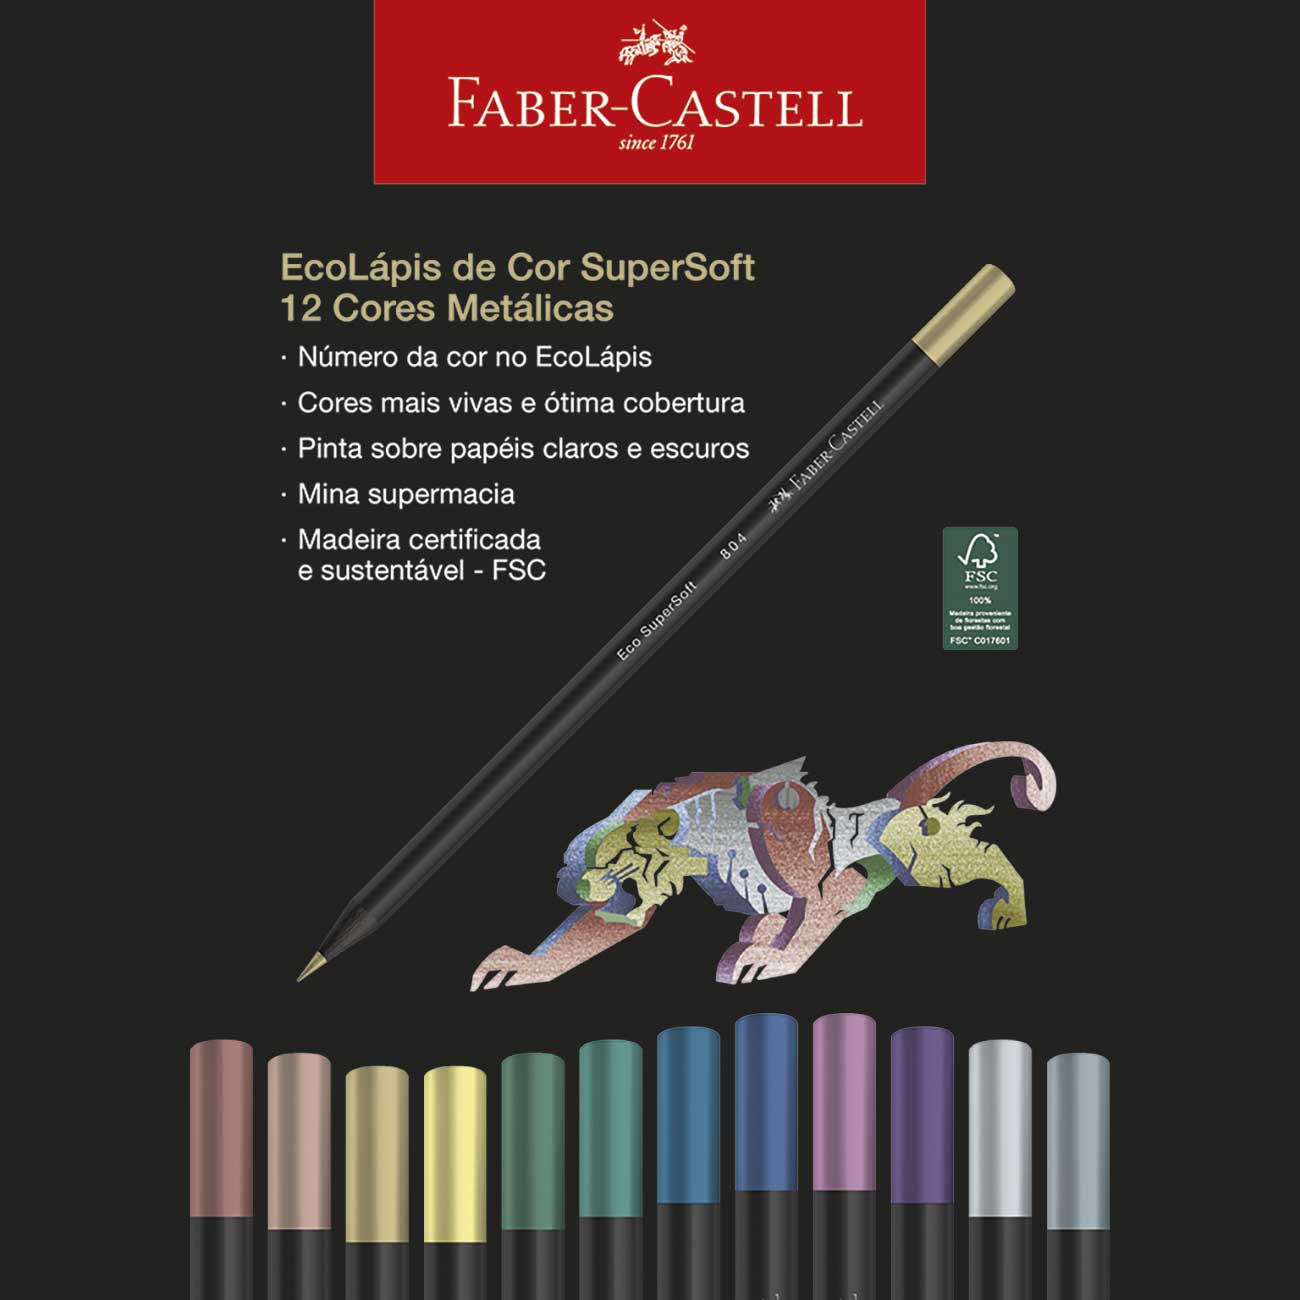 Ecolpis Faber-Castell Supersoft 12 Cores Metlicas